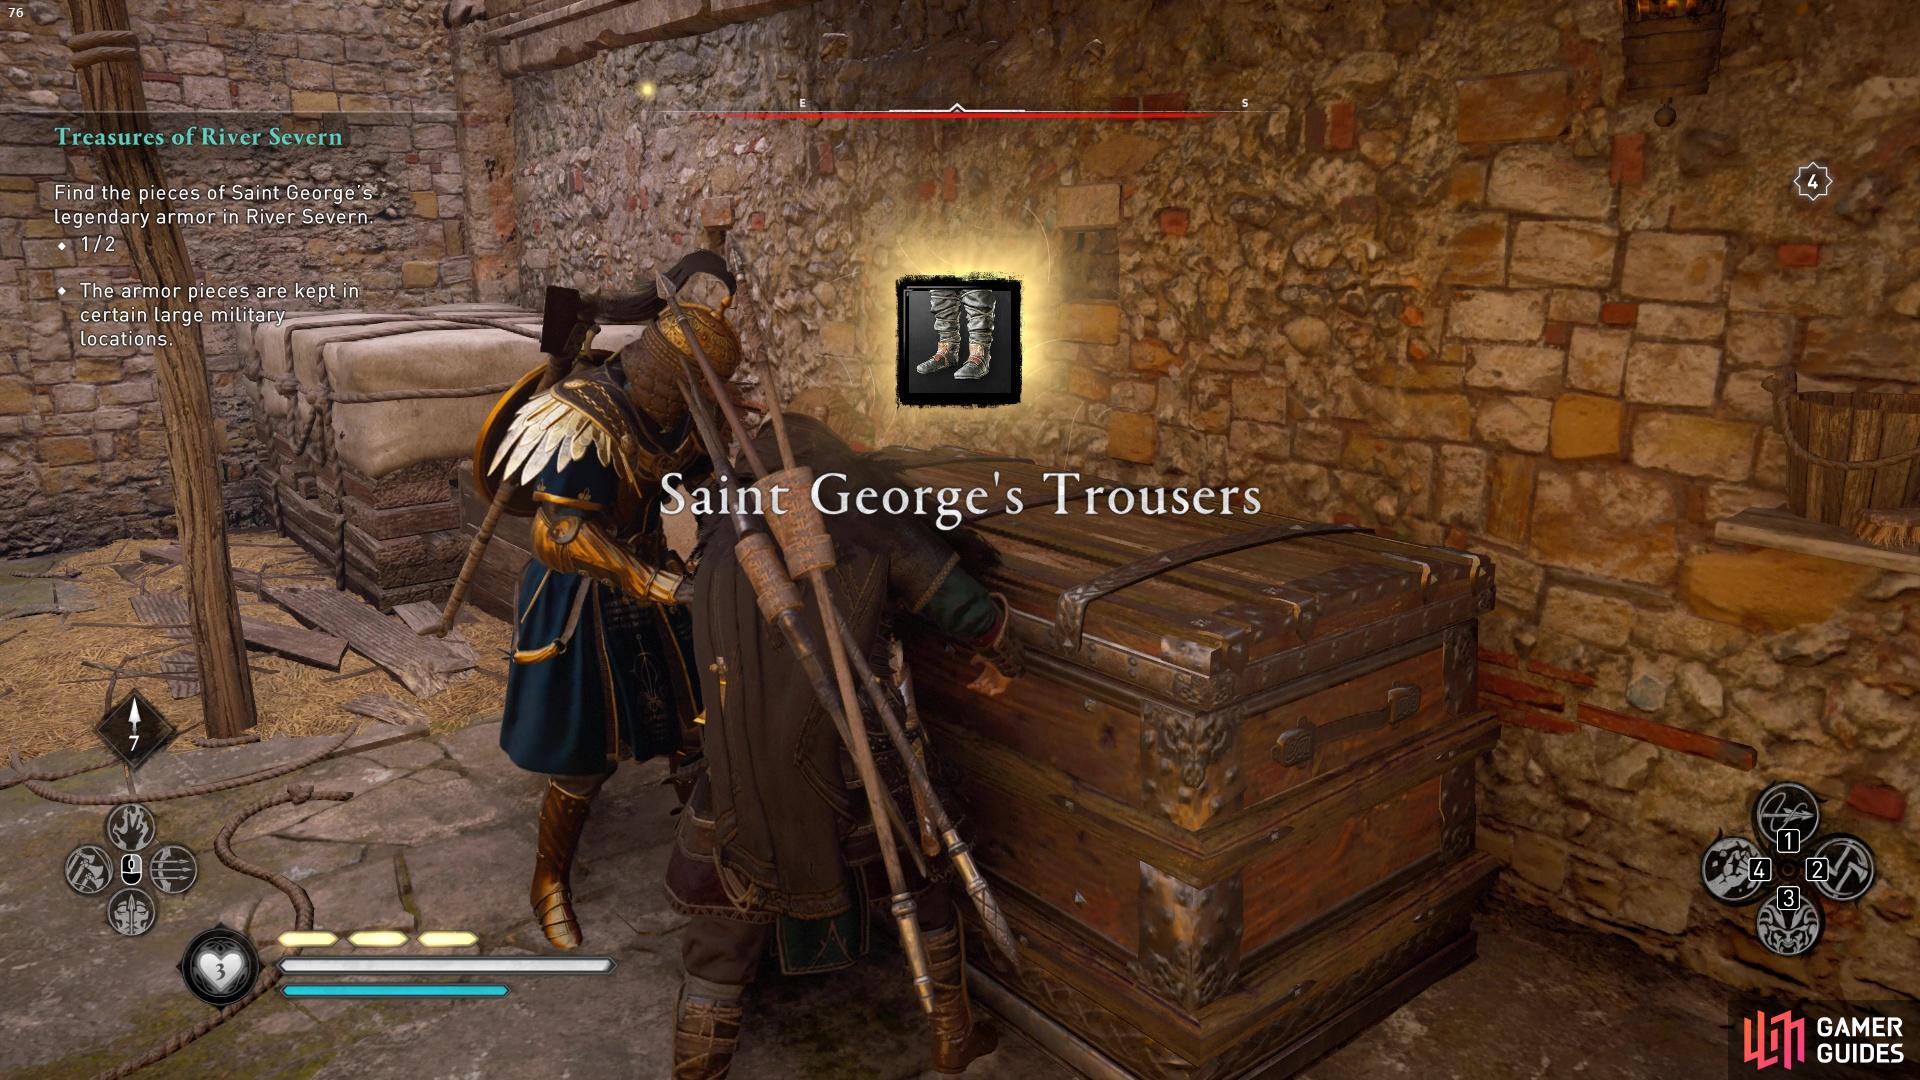 Saint George's Trousers can be found randomly in the larger military locations